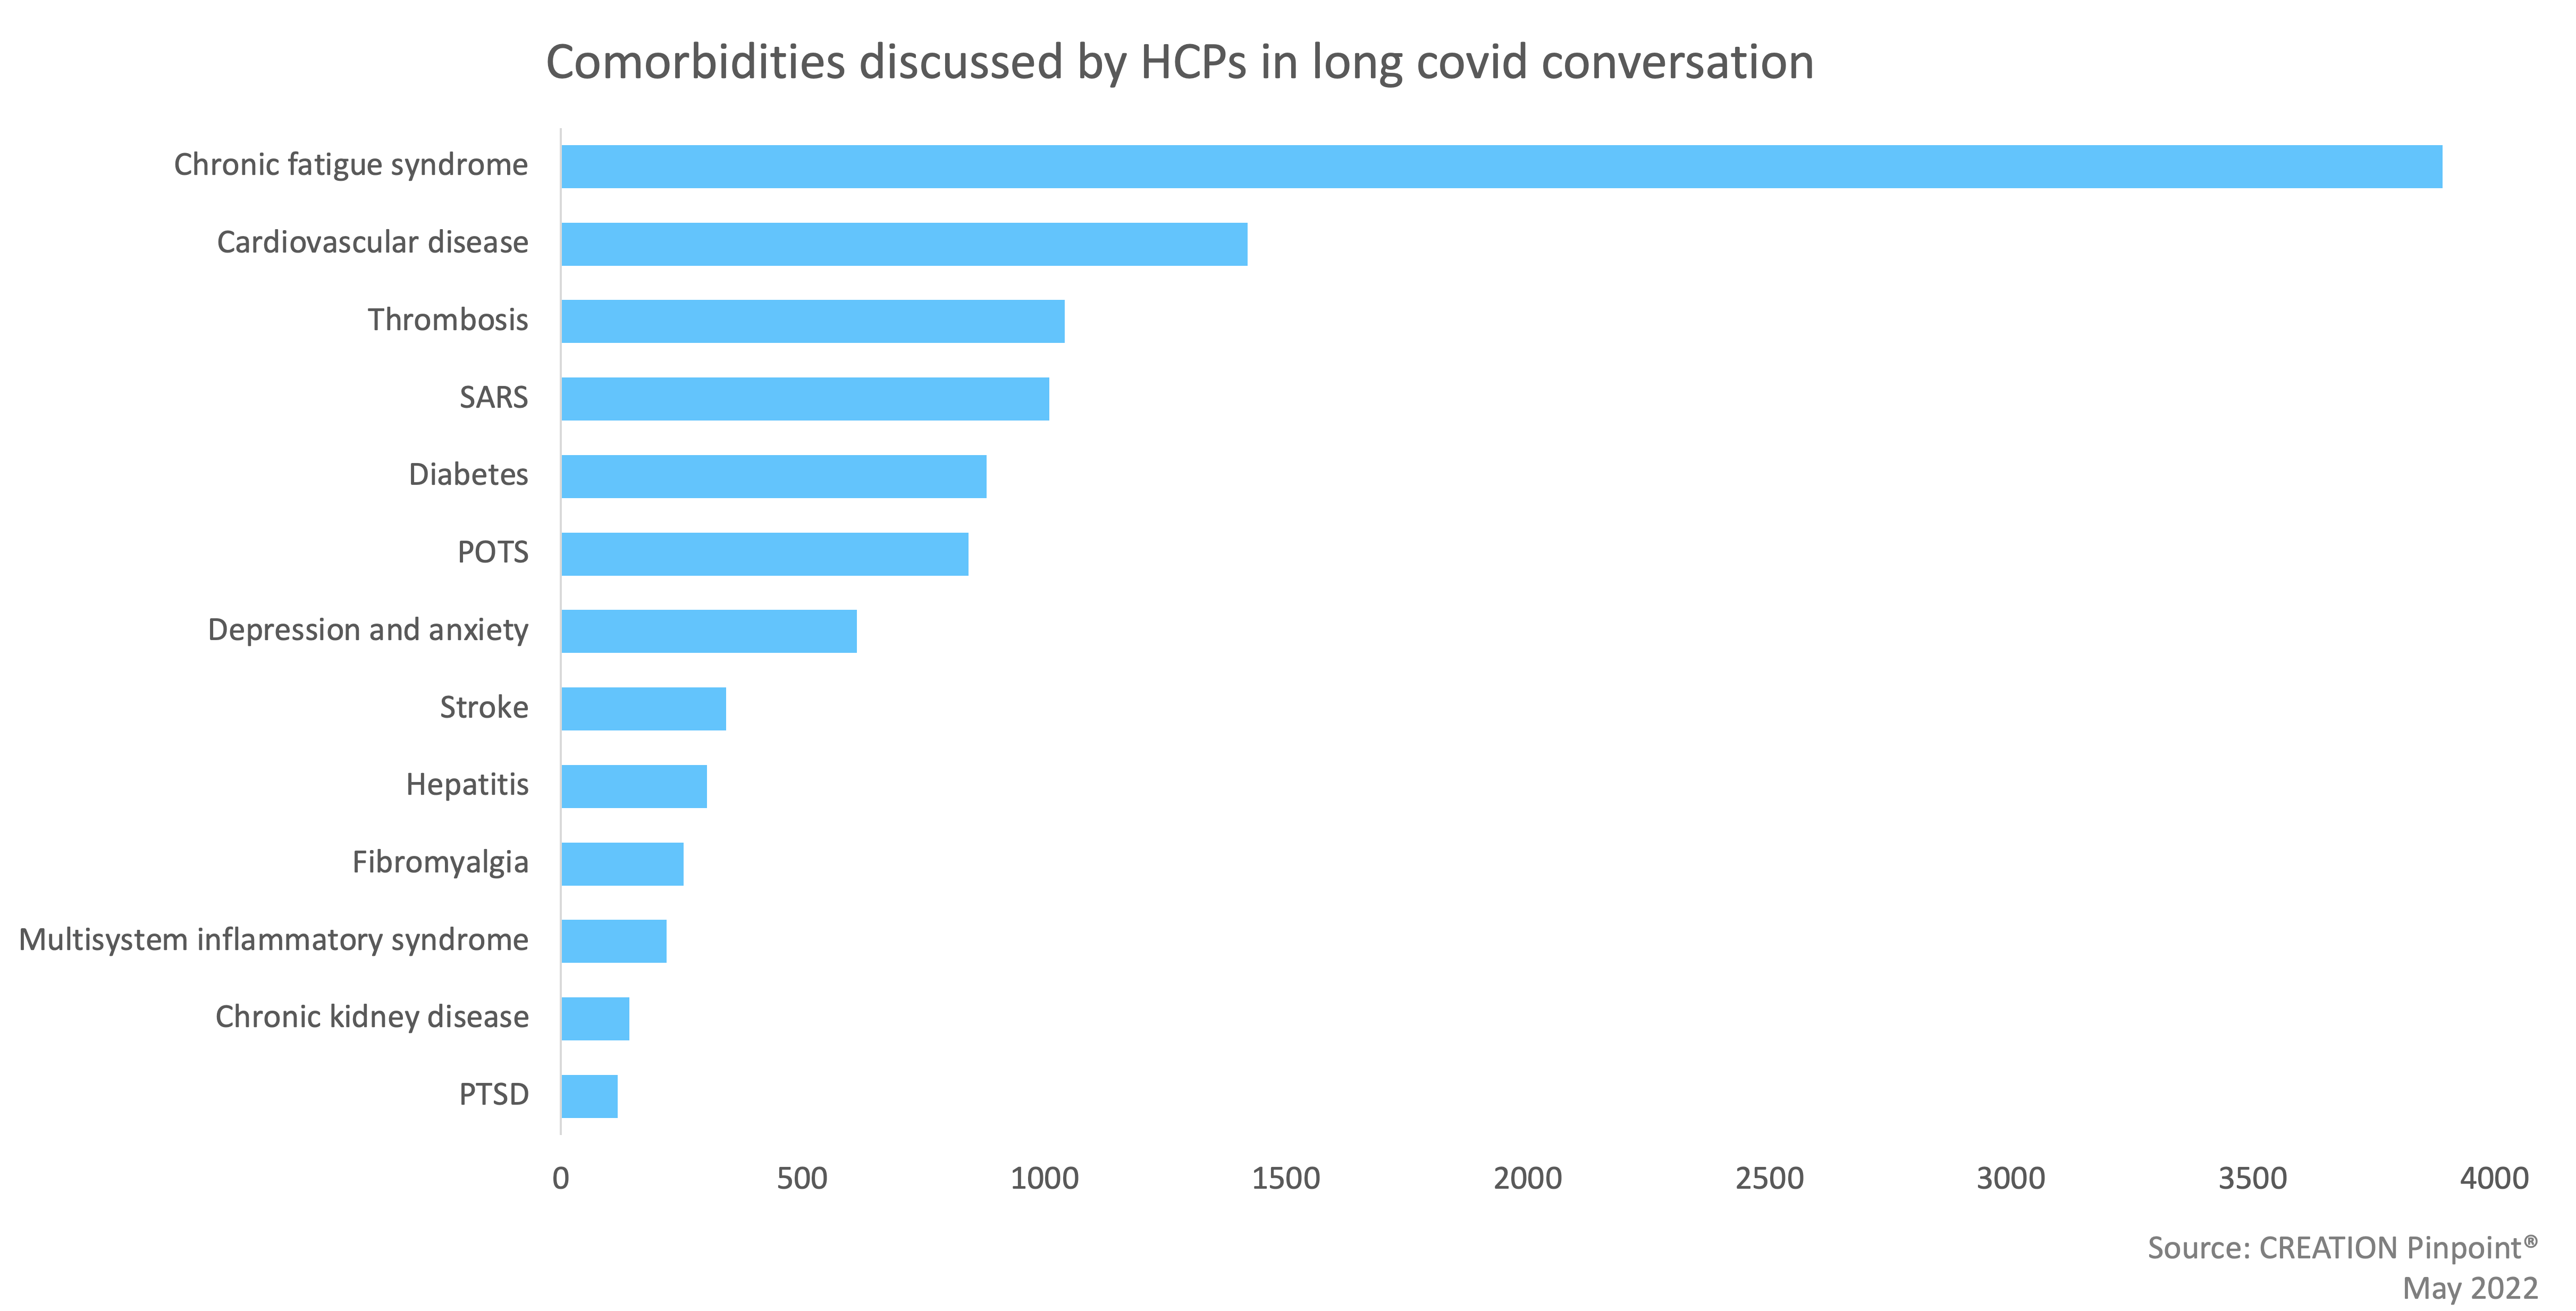 Graph showing comorbidities discussed by HCPs in long covid conversations